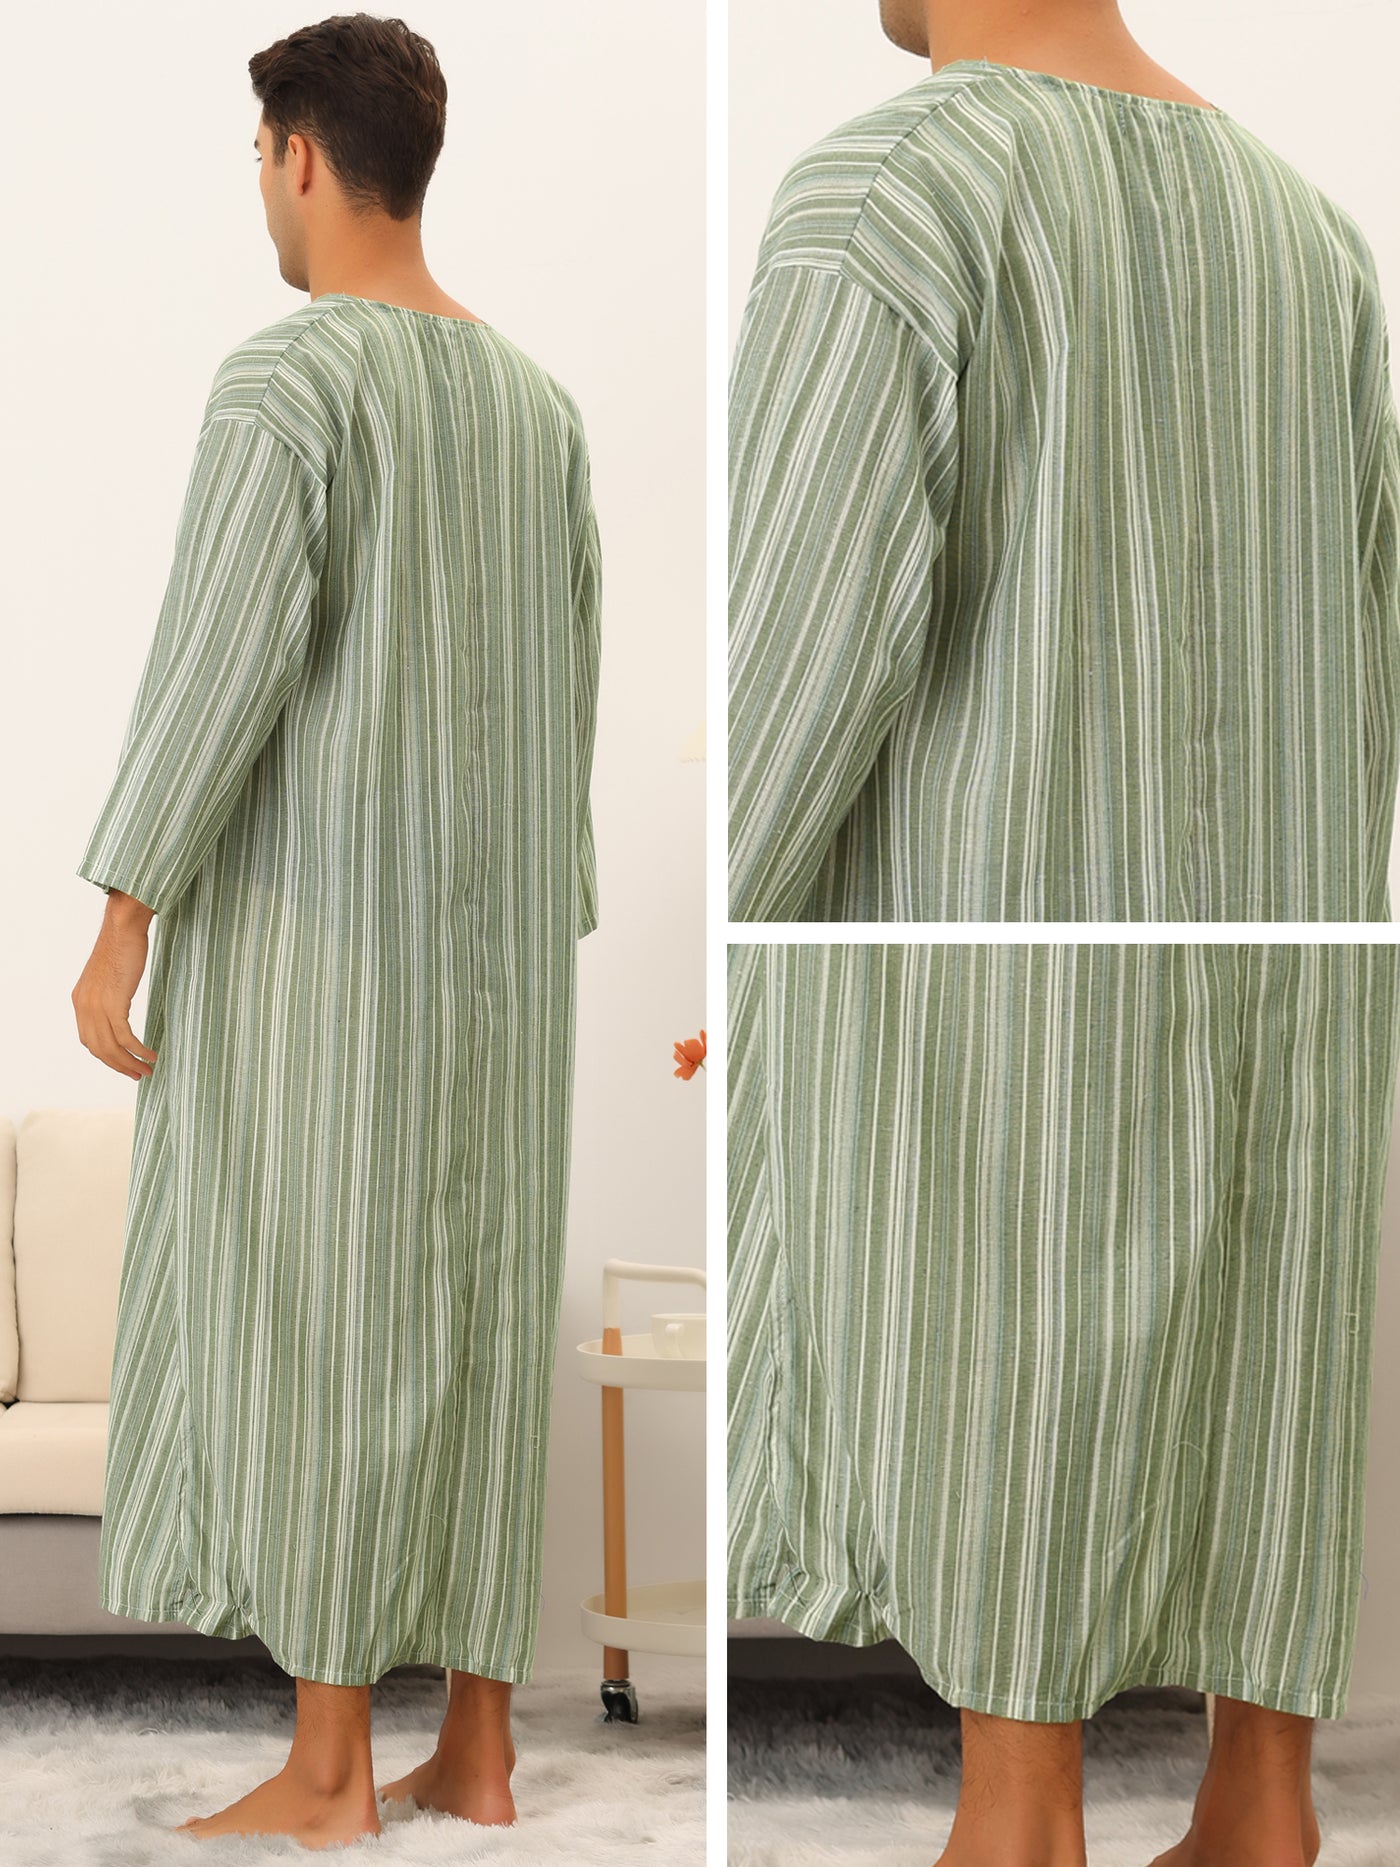 Bublédon Striped Nightshirts for Men's Loose Fit Lightweight Pajamas Long Sleep Gown